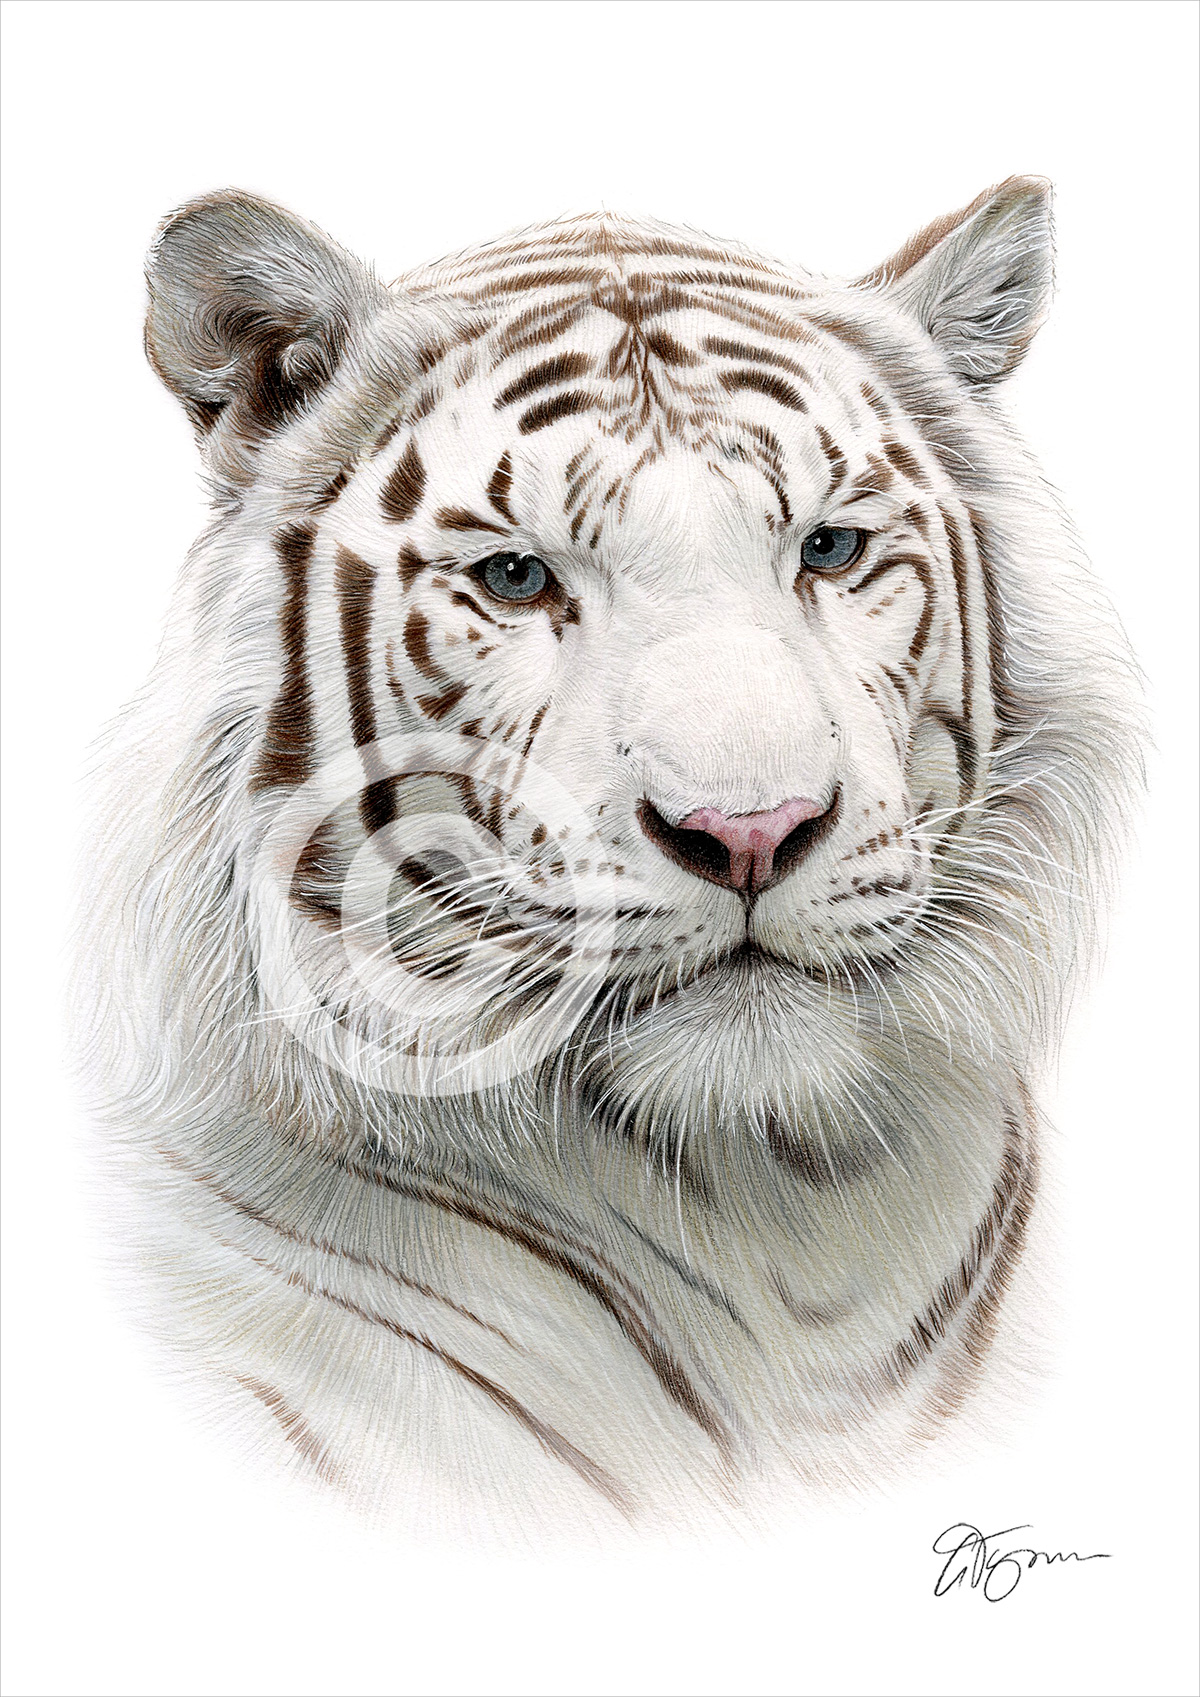 Colour pencil drawing of a white tiger by artist Gary Tymon